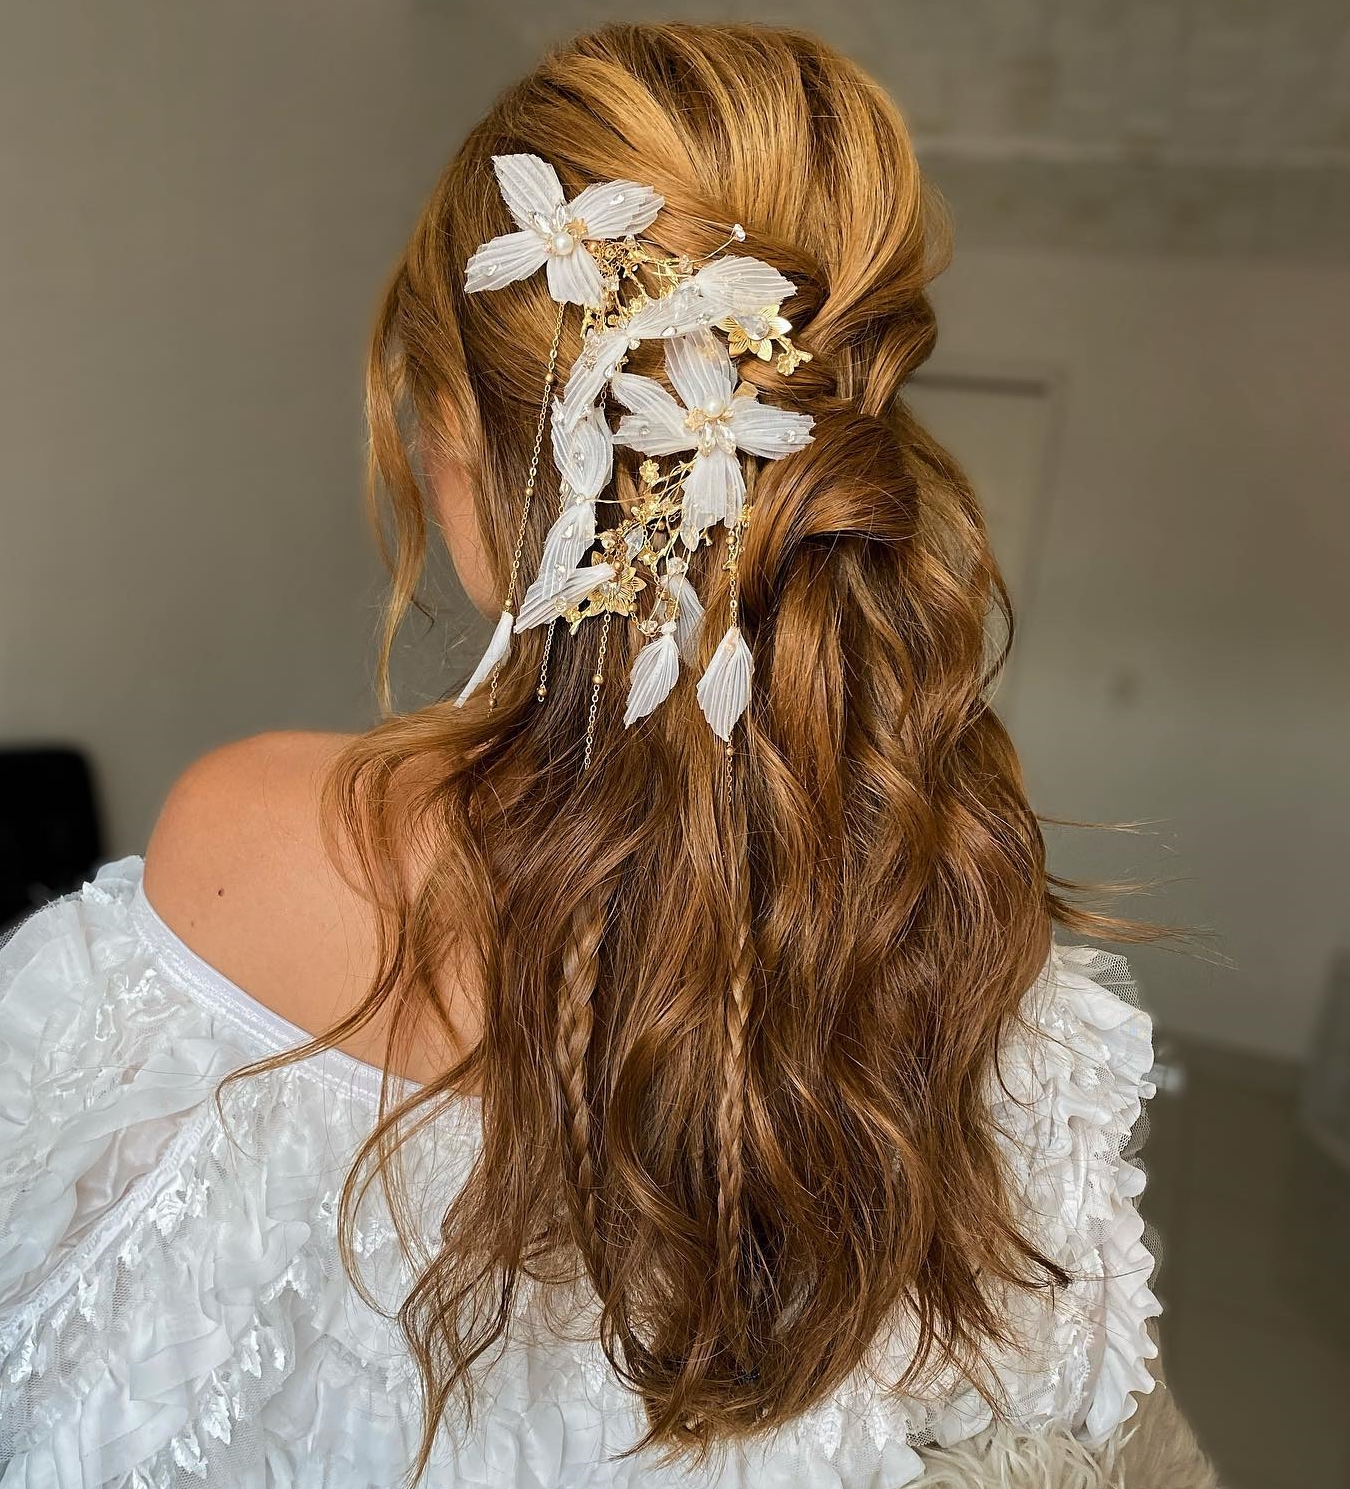 Half Up Half Down Wedding Hairstyle with Floral Hair Decor